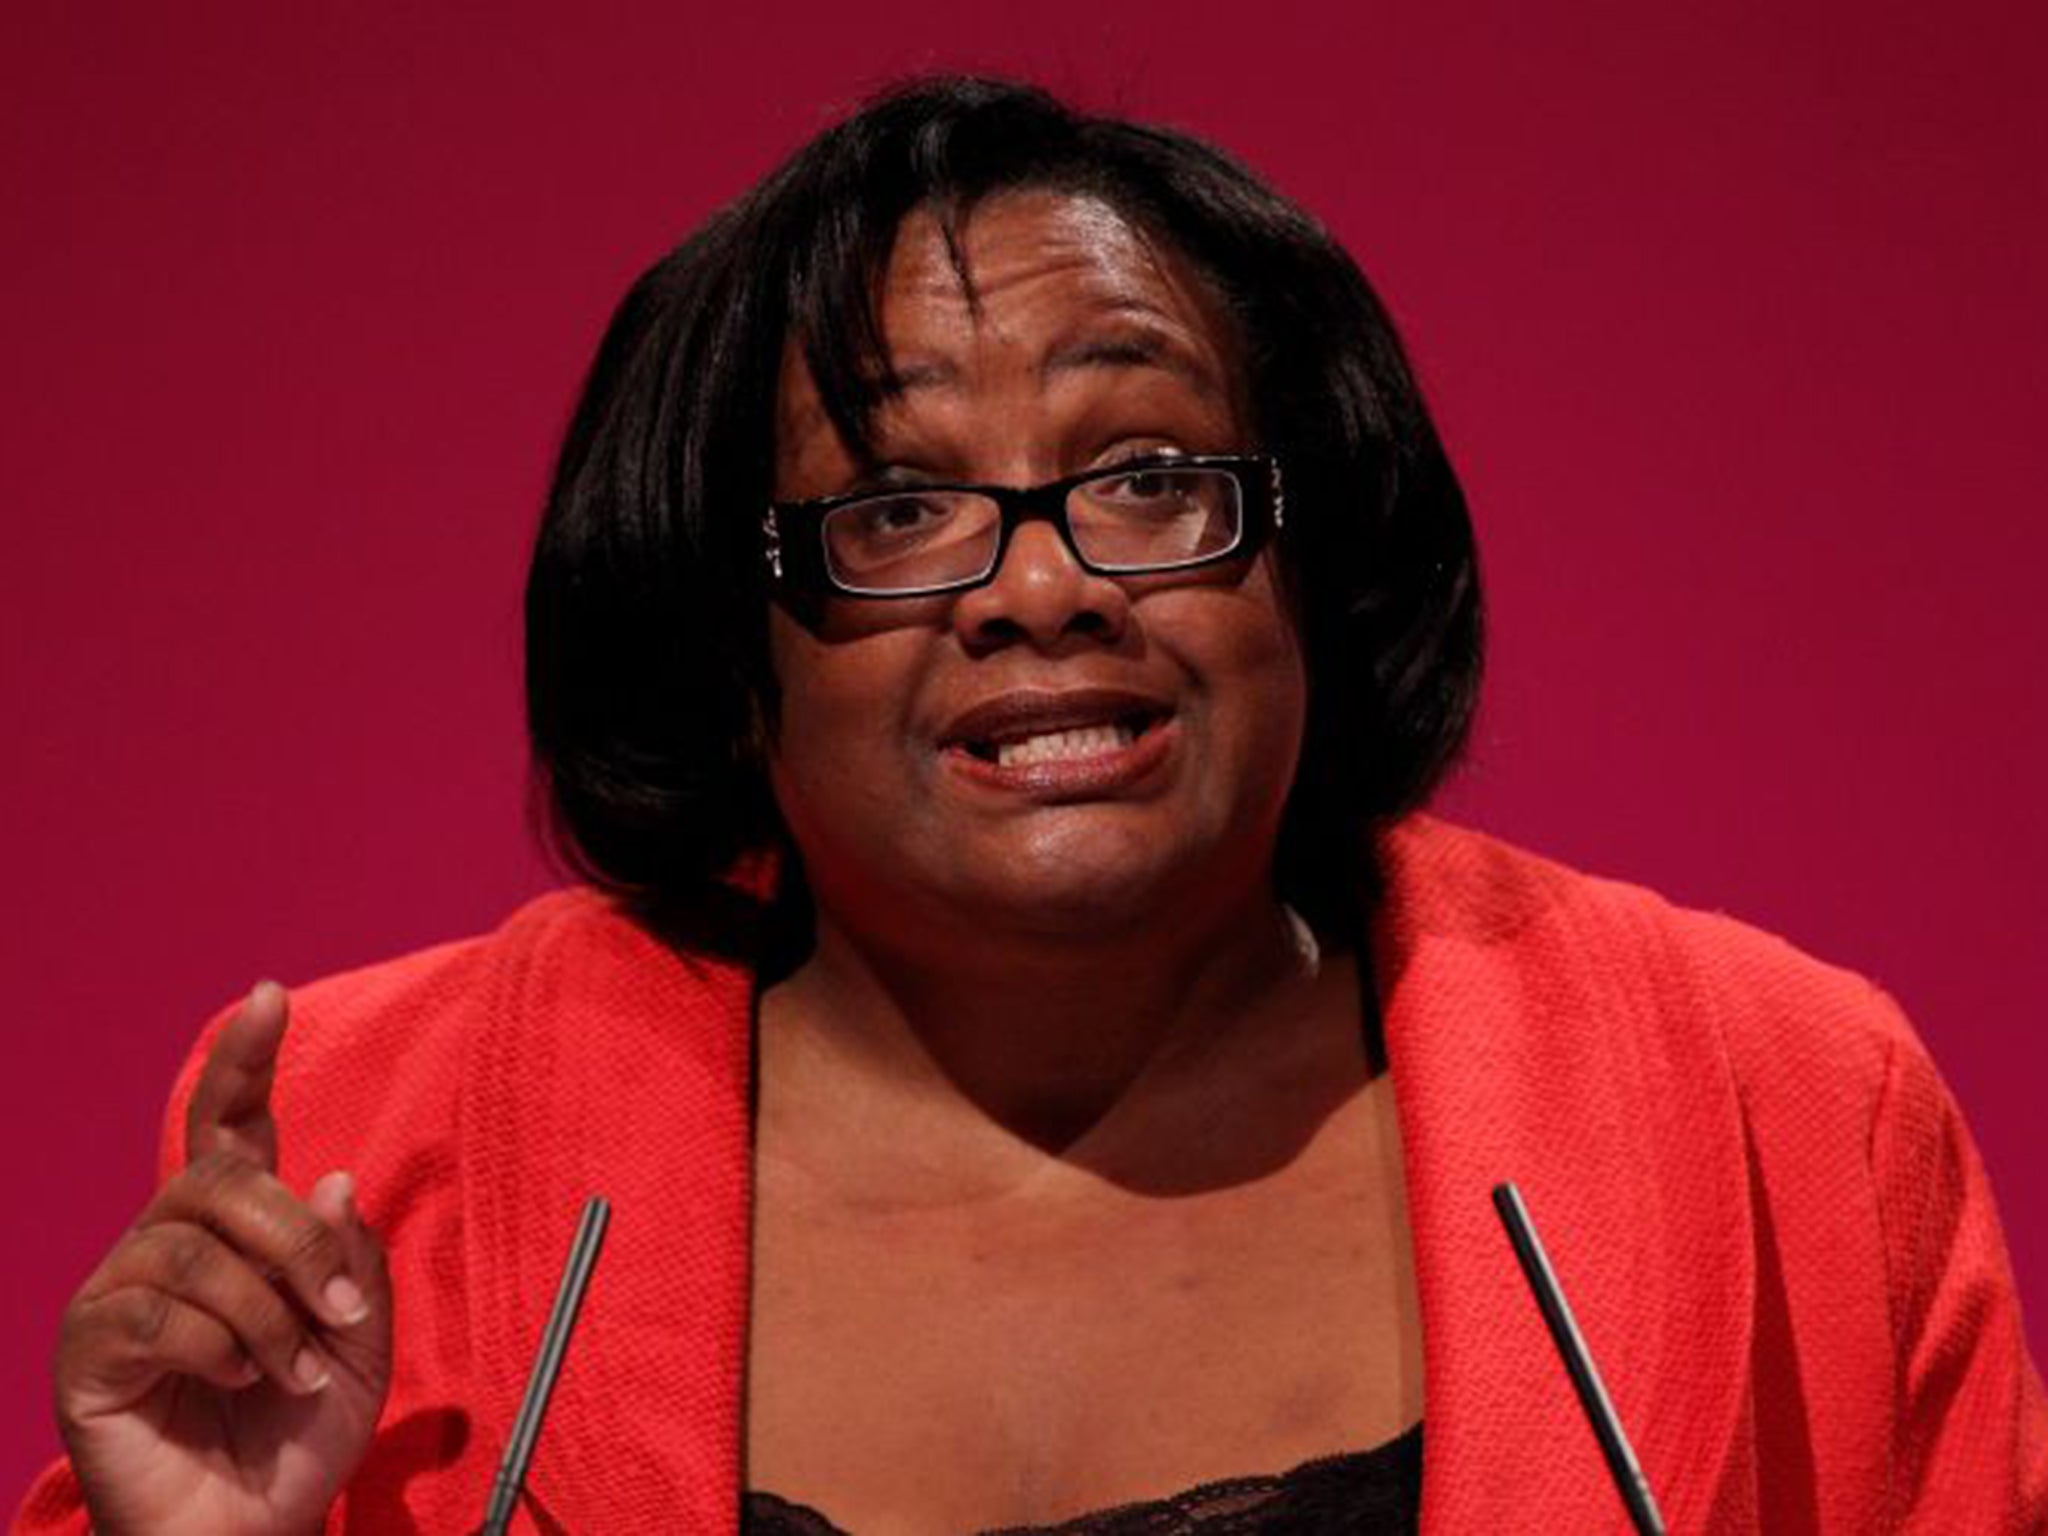 Dianne Abbott has been a previous shadow health minister and could get a promotion to shadow Health Secretary in a Corbyn cabinet (Getty)